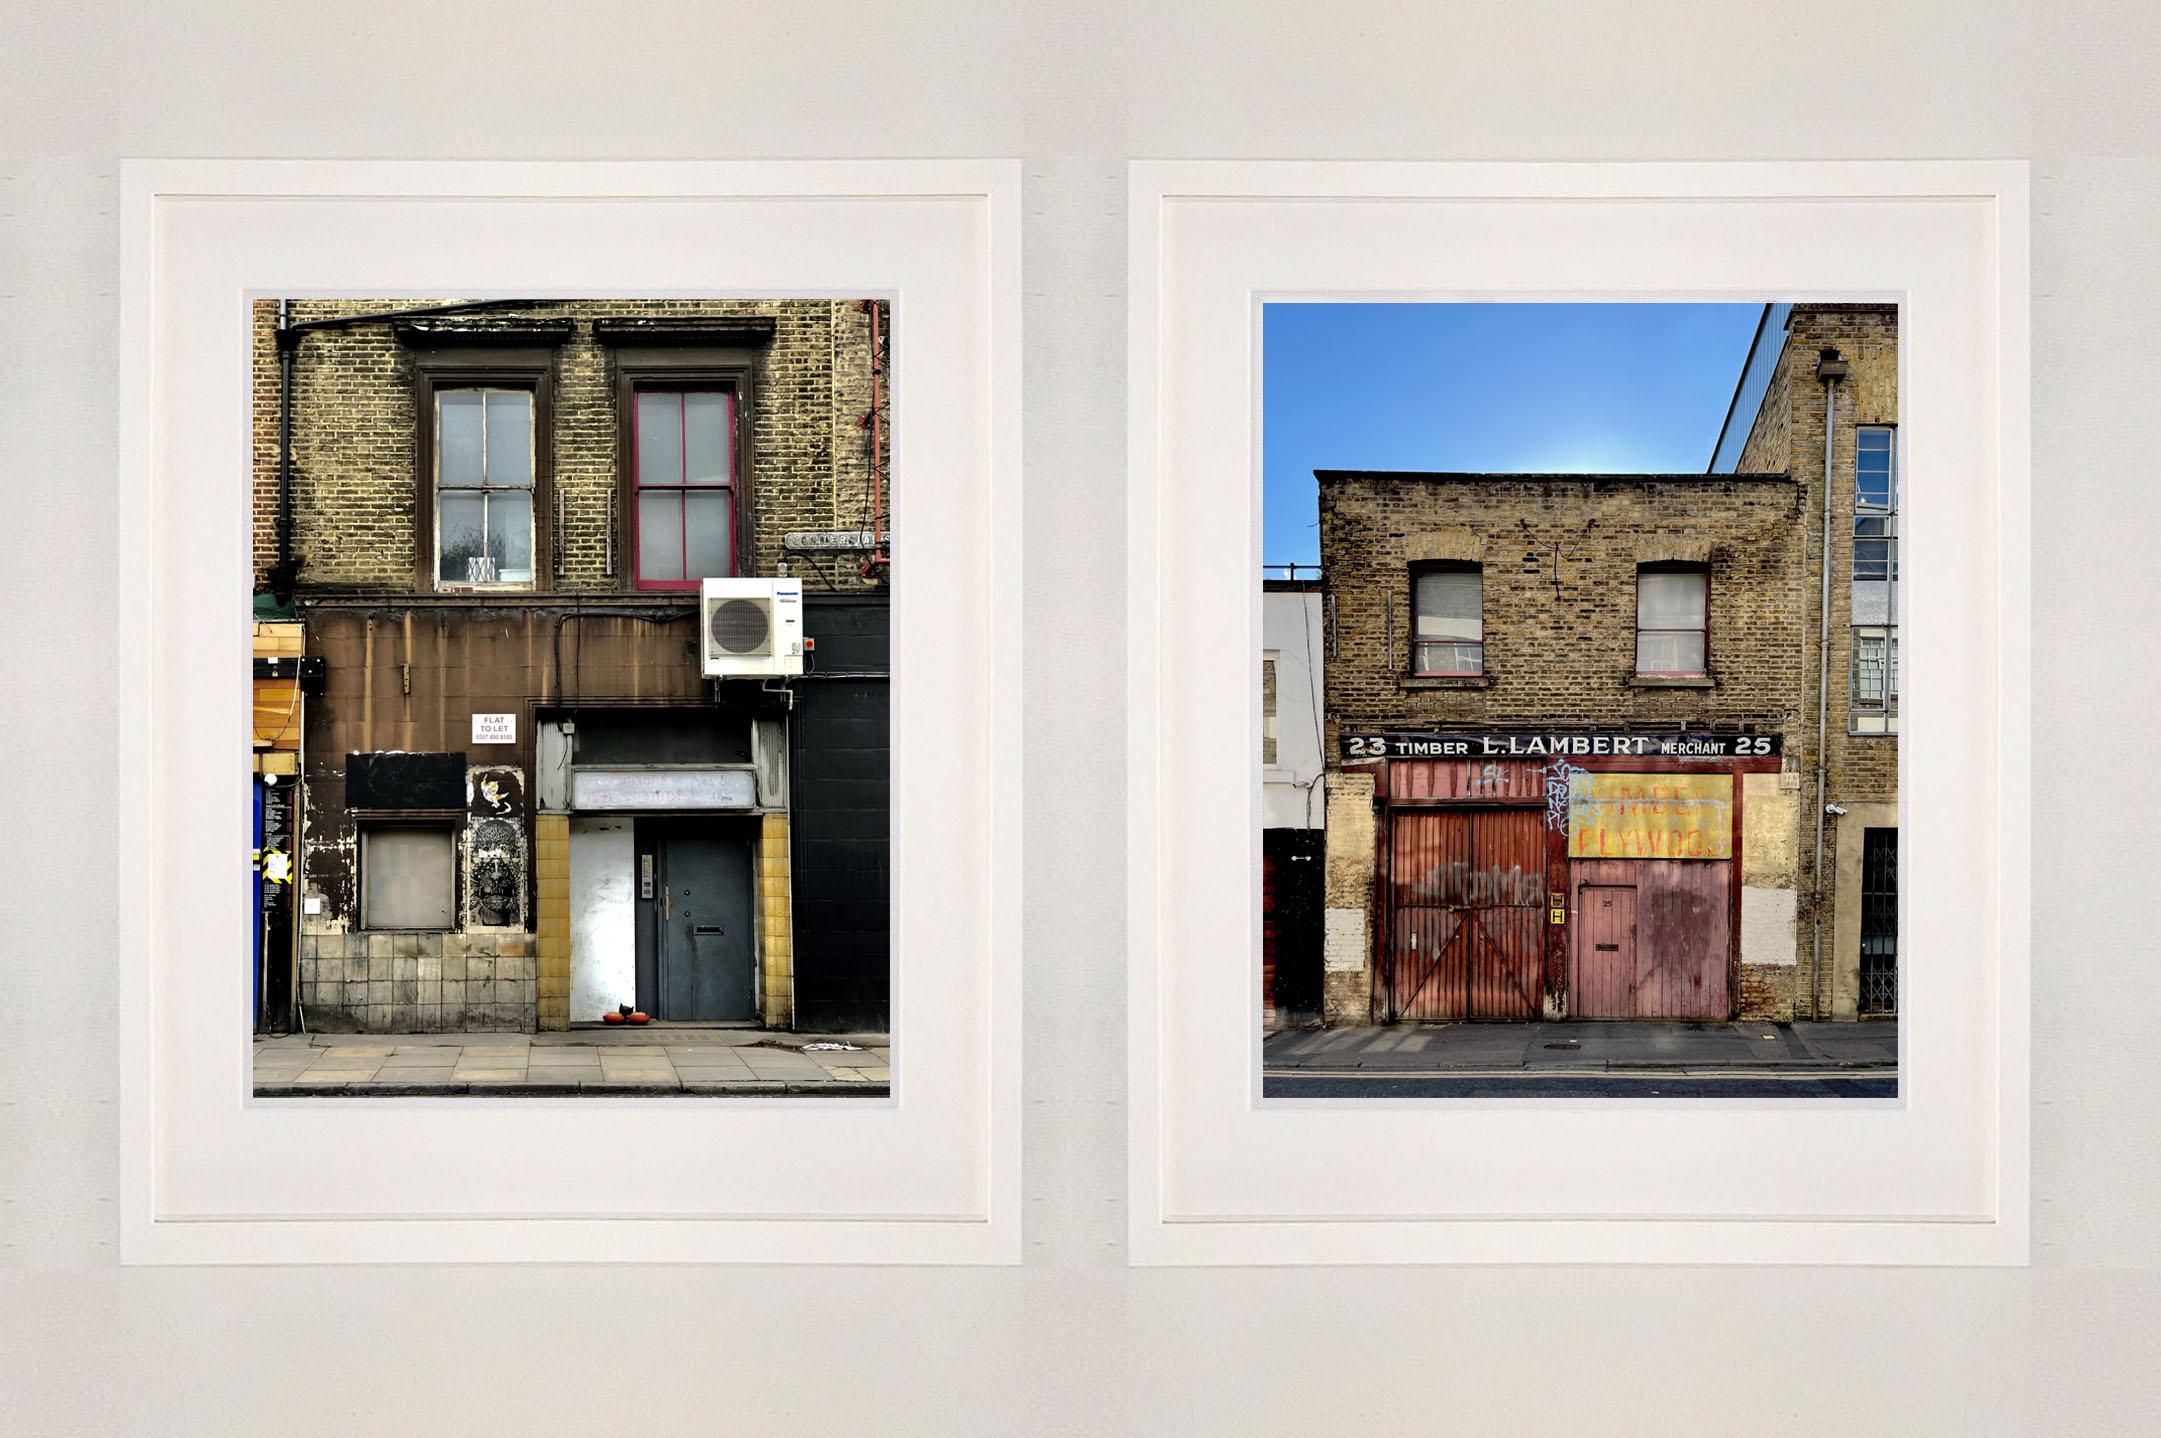 'Flat to Let', East London street photography from Richard Heeps' series A Short History of London.

This artwork is a limited edition of 25 gloss photographic print, dry-mounted to aluminium, presented in a museum board white window mount and a